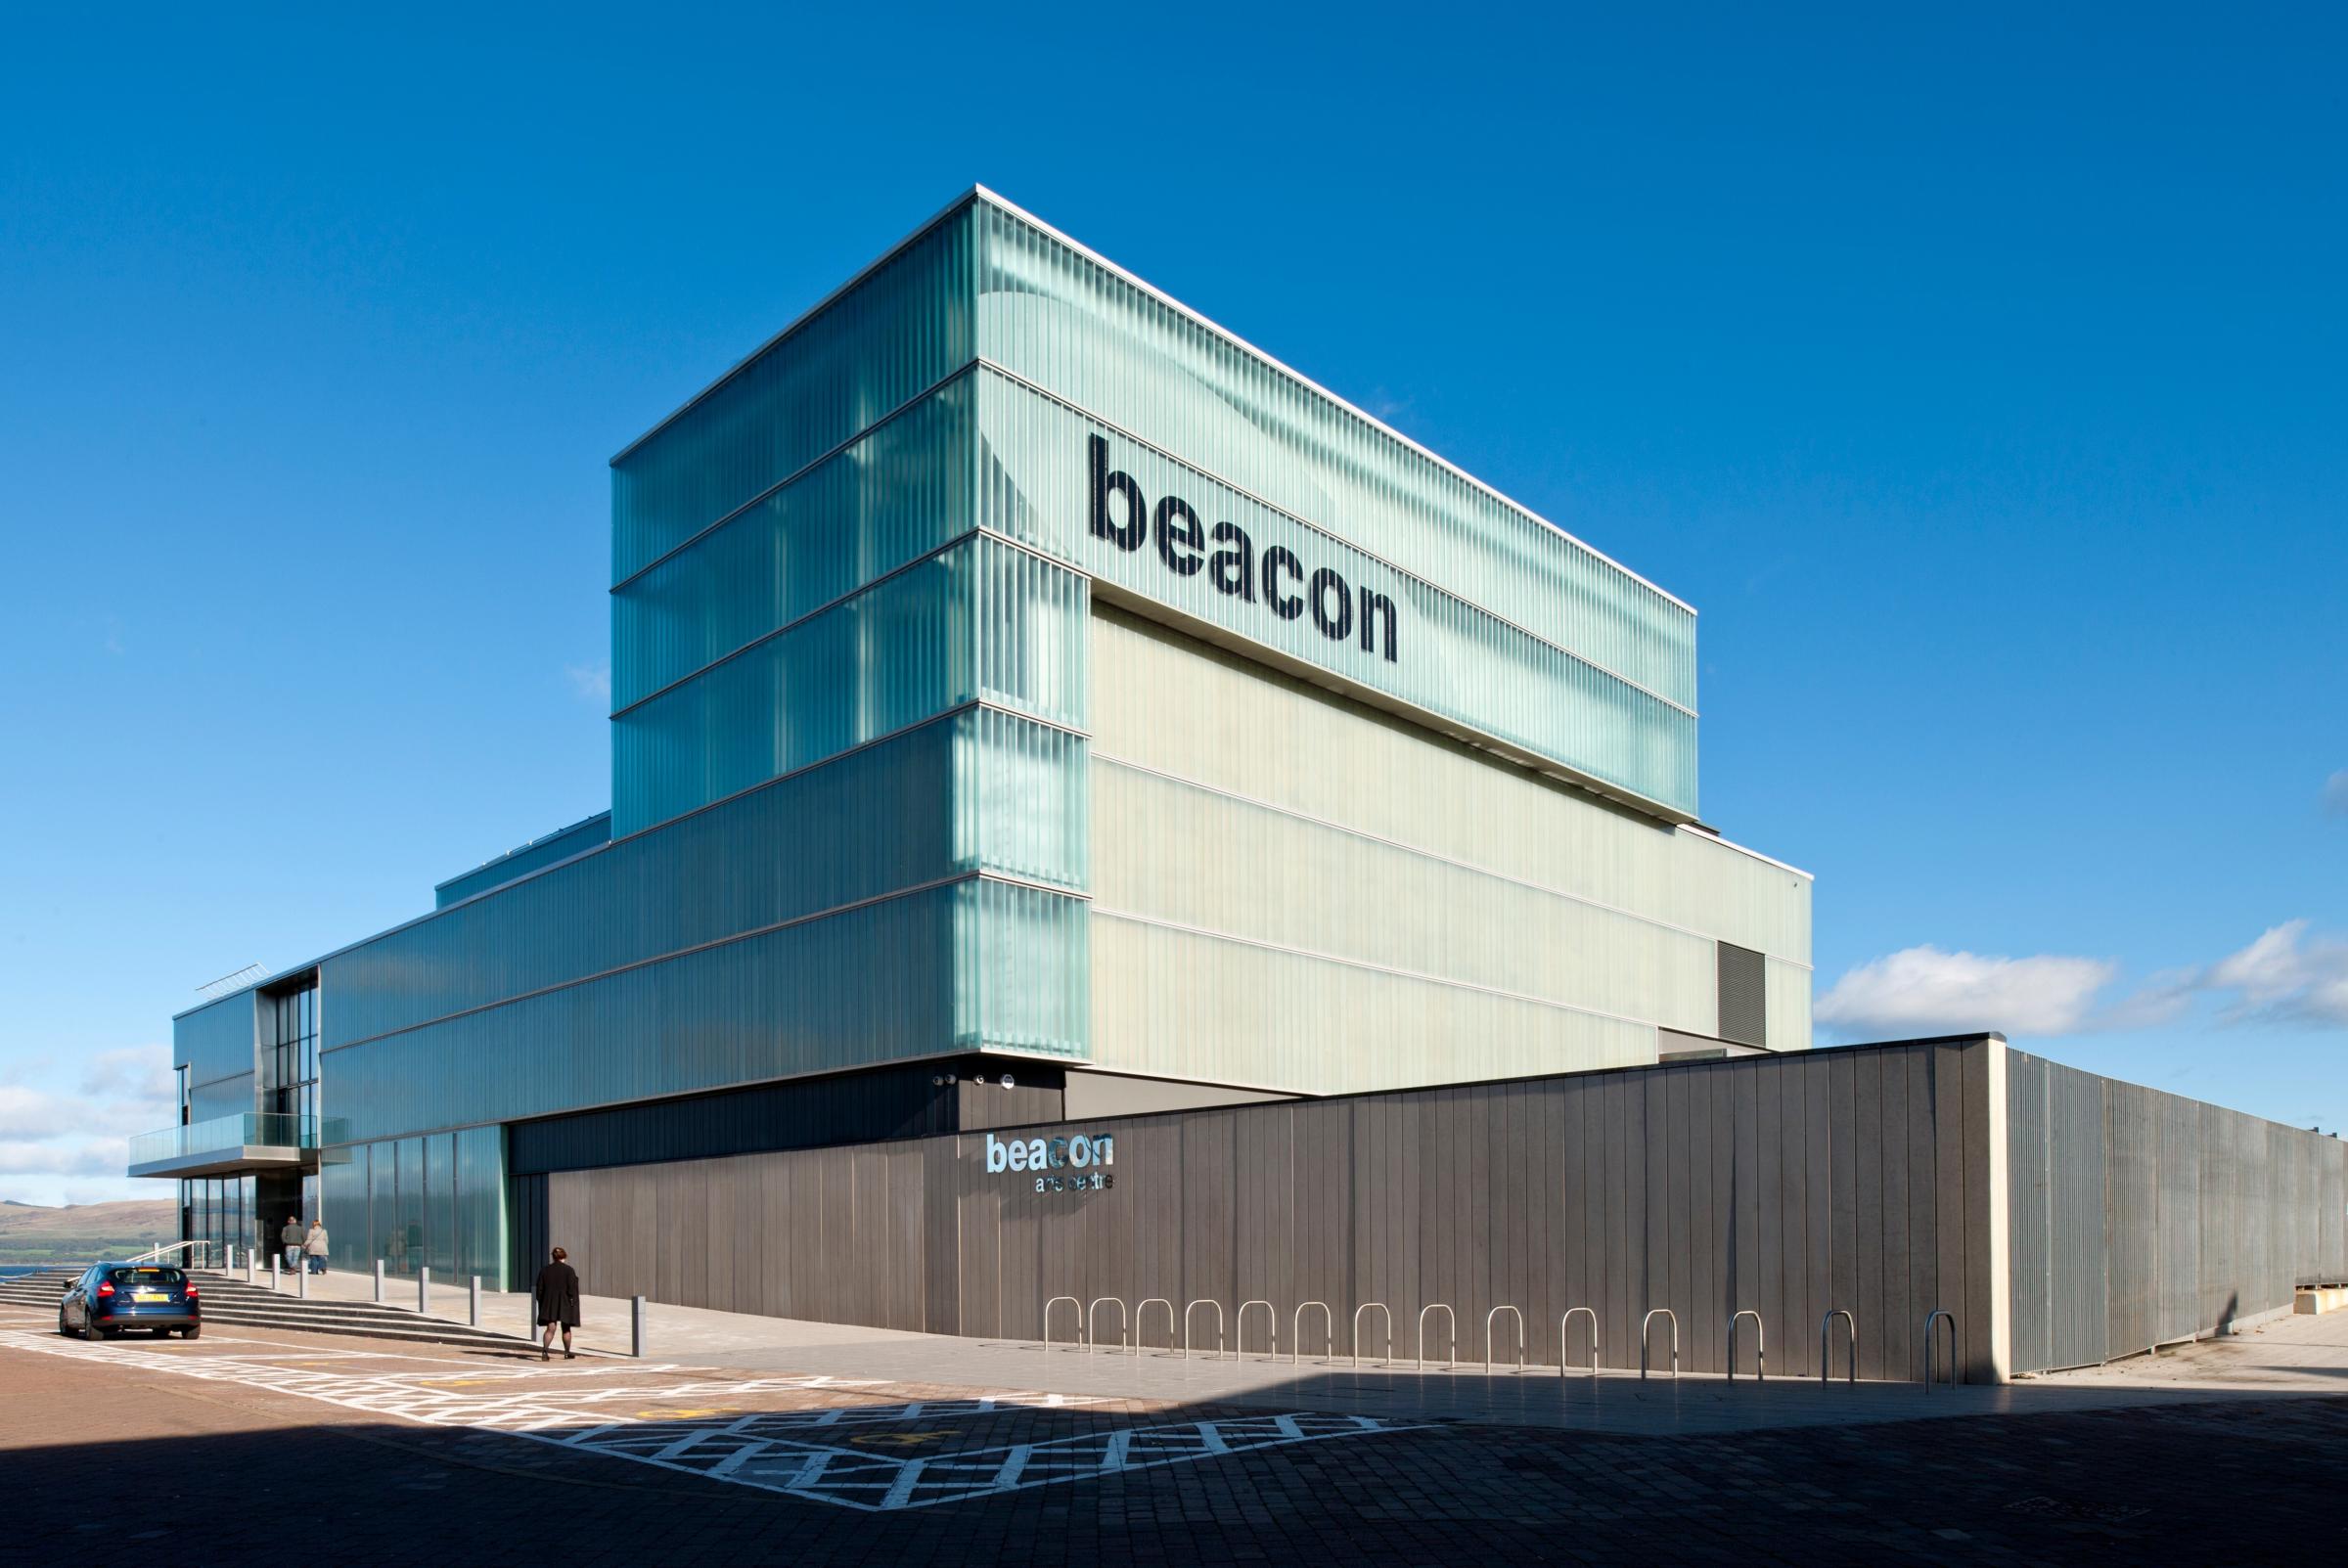 Beacon event to welcome refugees and asylum seekers